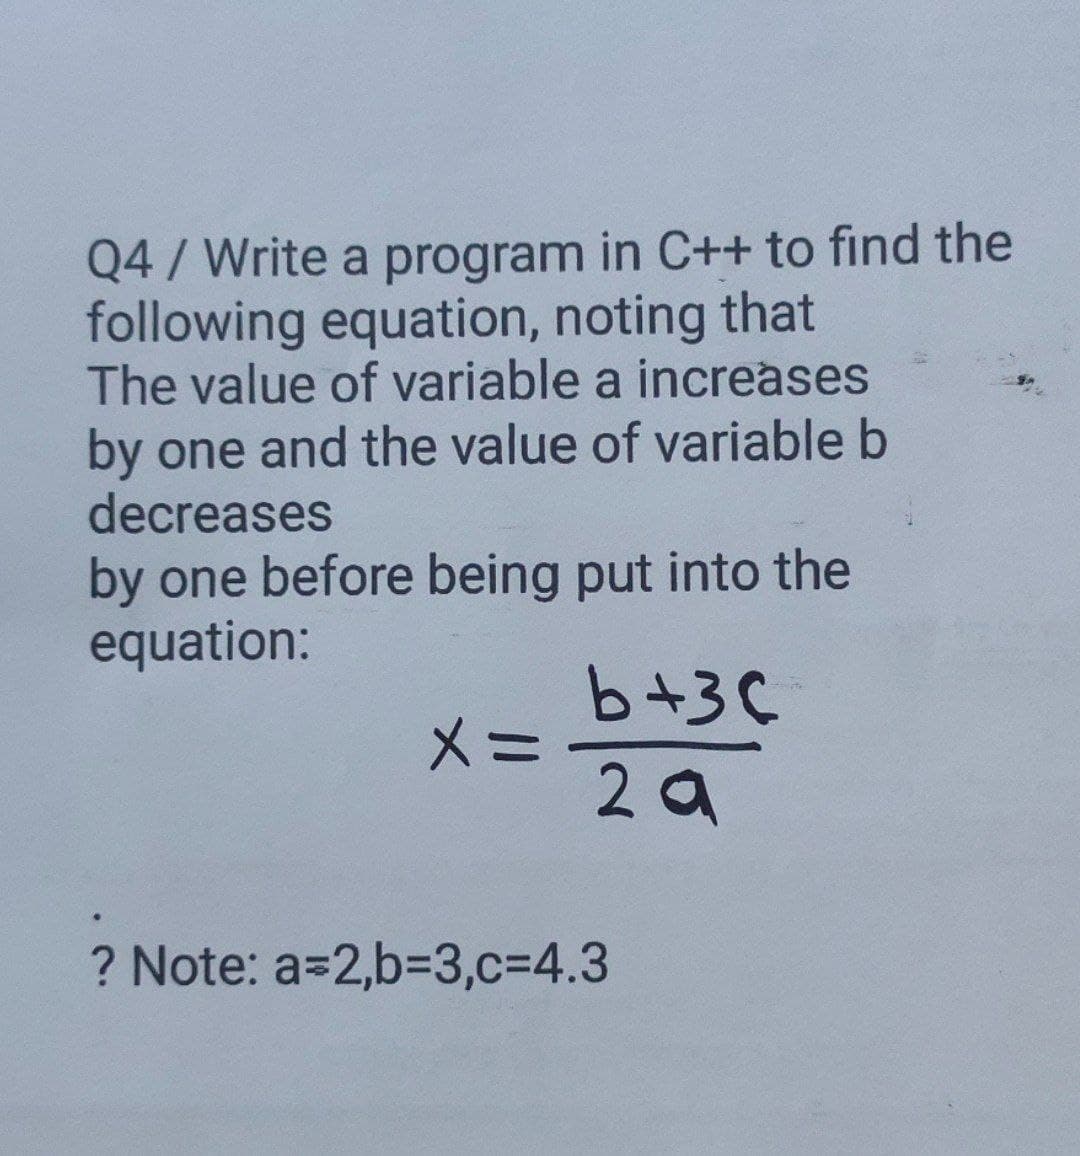 Q4/ Write a program in C++ to find the
following equation, noting that
The value of variable a increases
by one and the value of variable b
decreases
by one before being put into the
equation:
b+3C
メ=
2 a
? Note: a=2,b33,c=4.3
